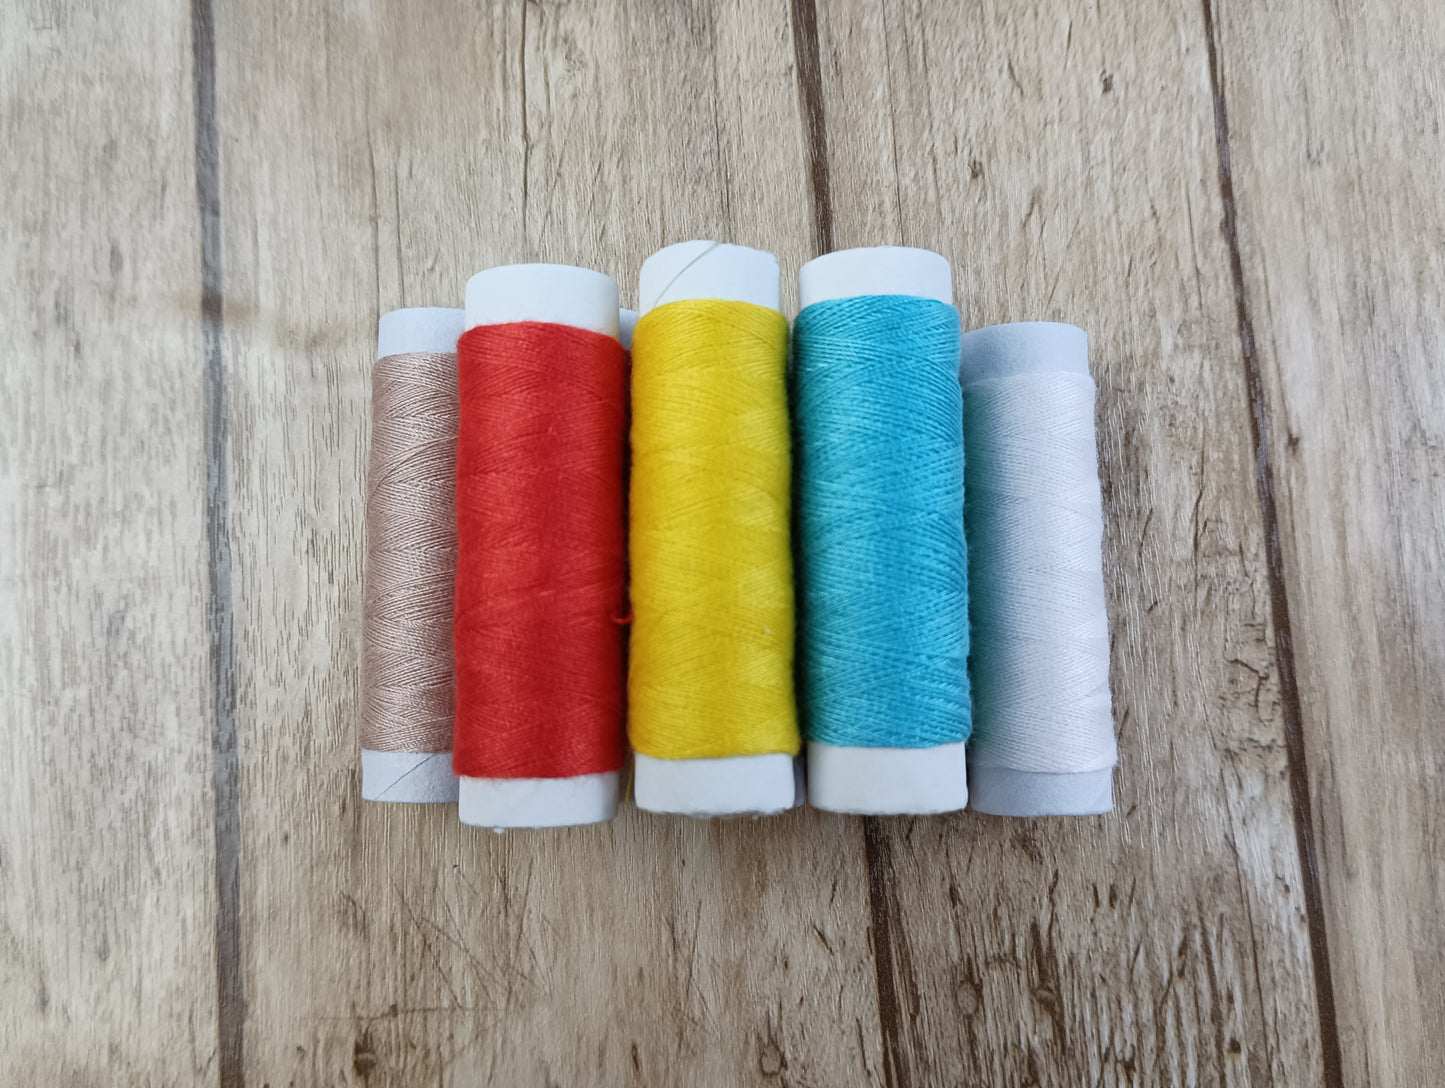 AWXUOCK Cotton Sewing Thread, 8-Pack, Large Spools, High Quality, Various Colors, Convenient for Travel, 129.98g Weight